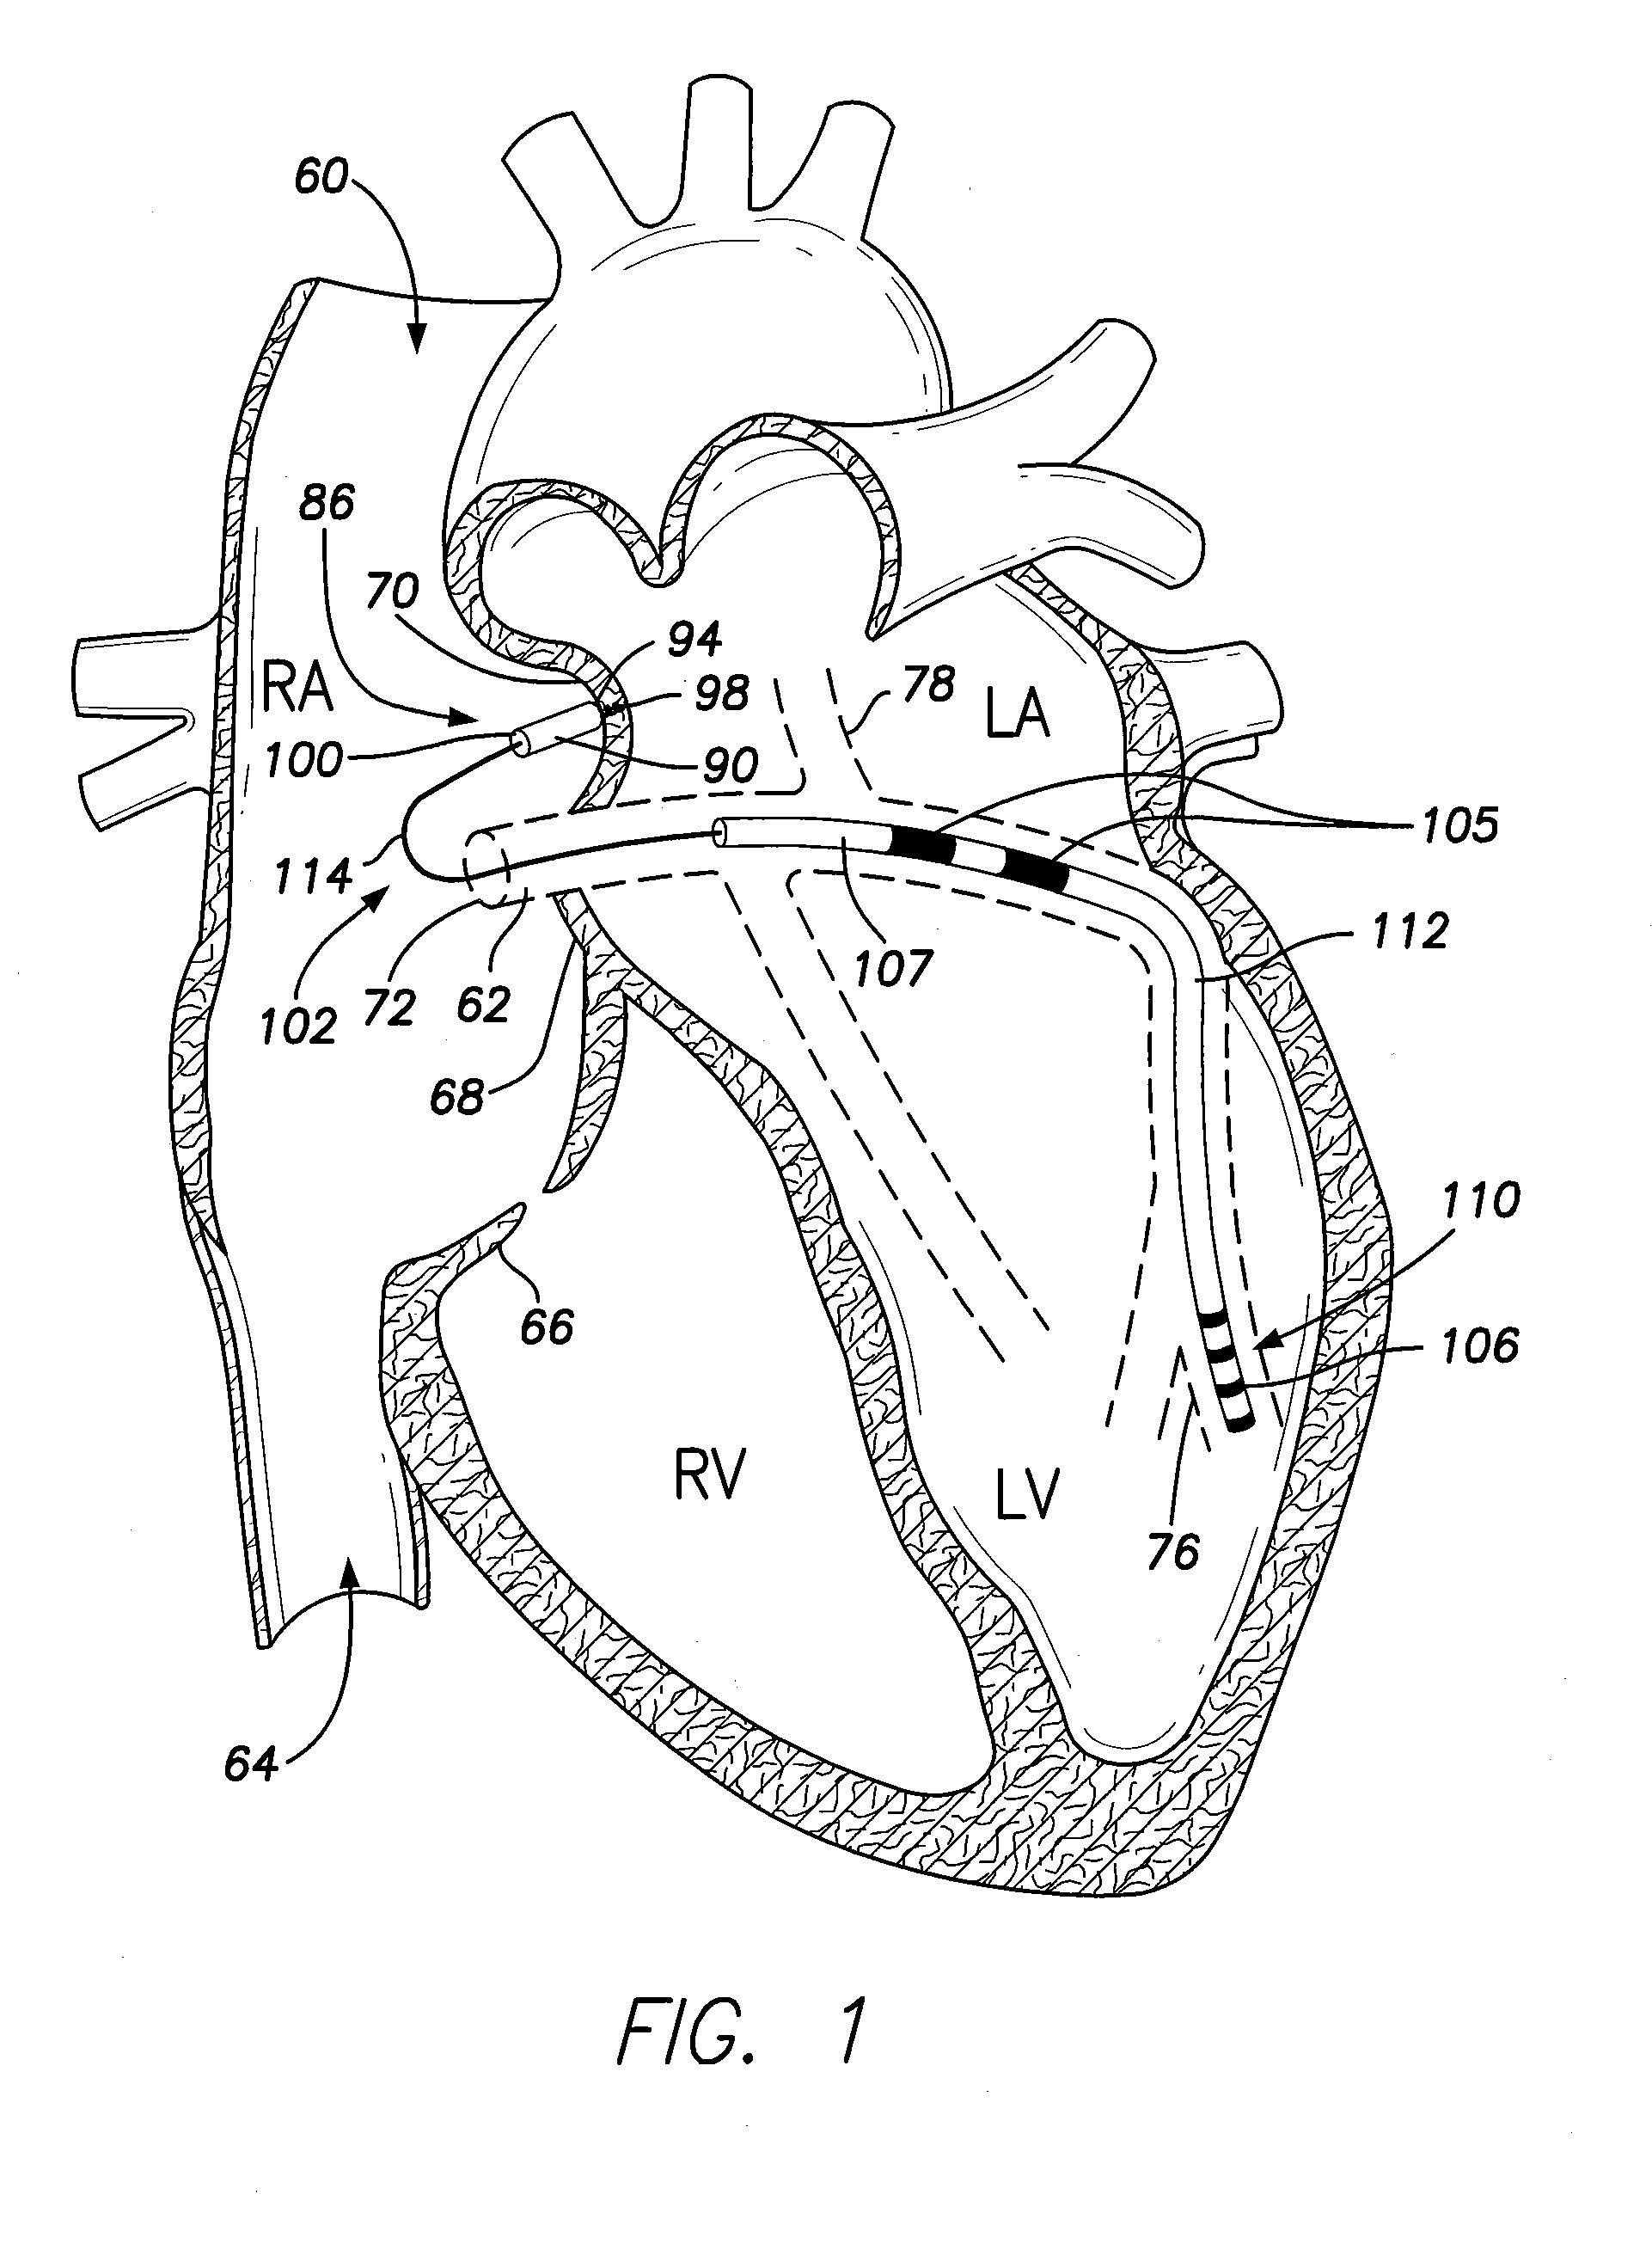 Intra-cardiac implantable medical device with IC device extension for lv pacing/sensing